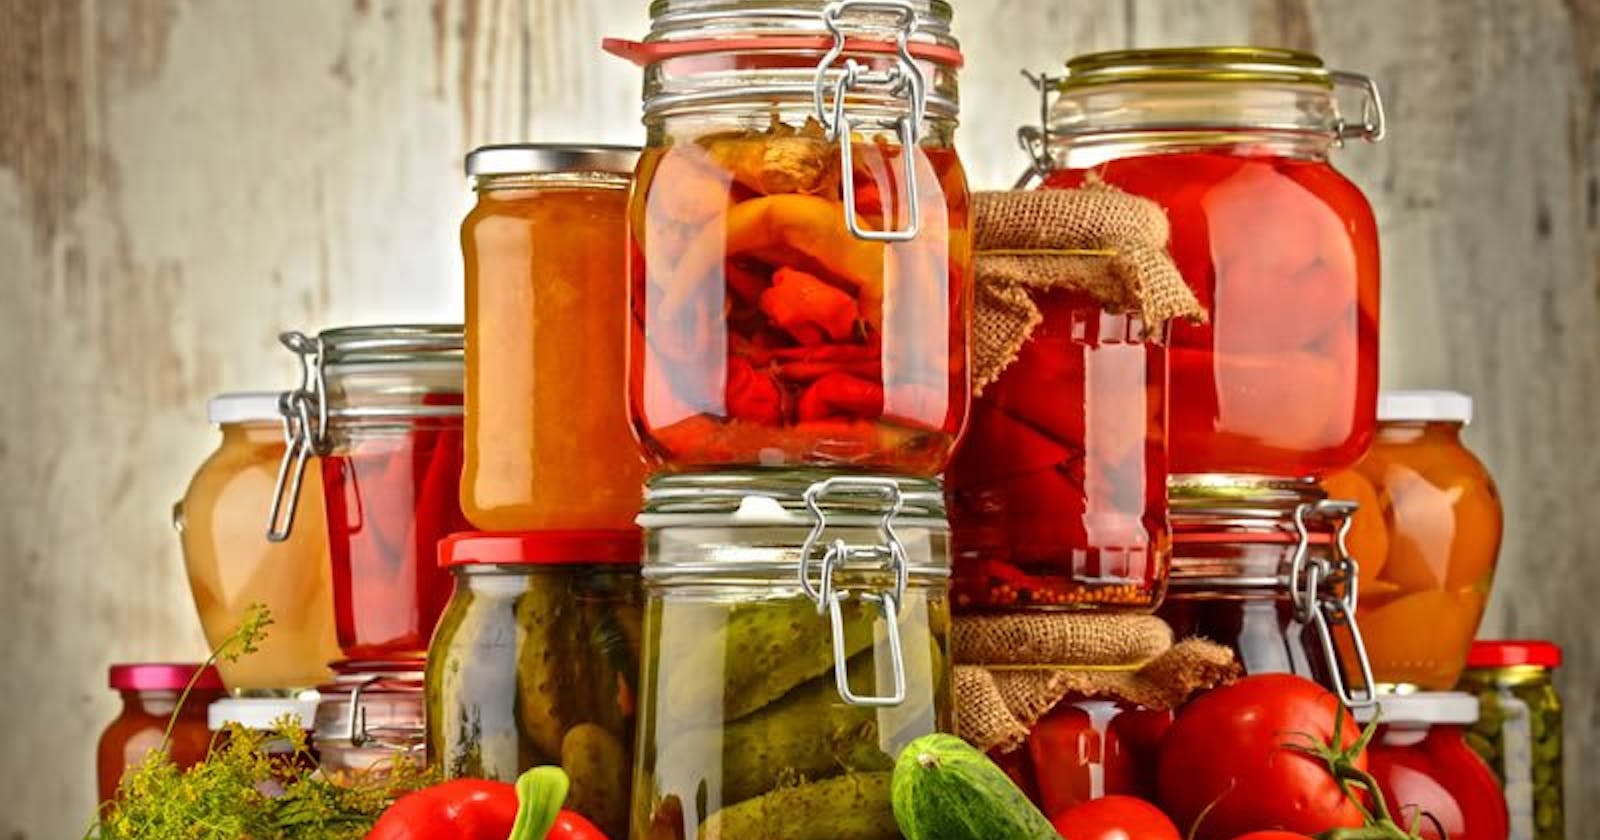 Food Preservatives Market 2021-26: Scope, Size, Trends and Growth Opportunities